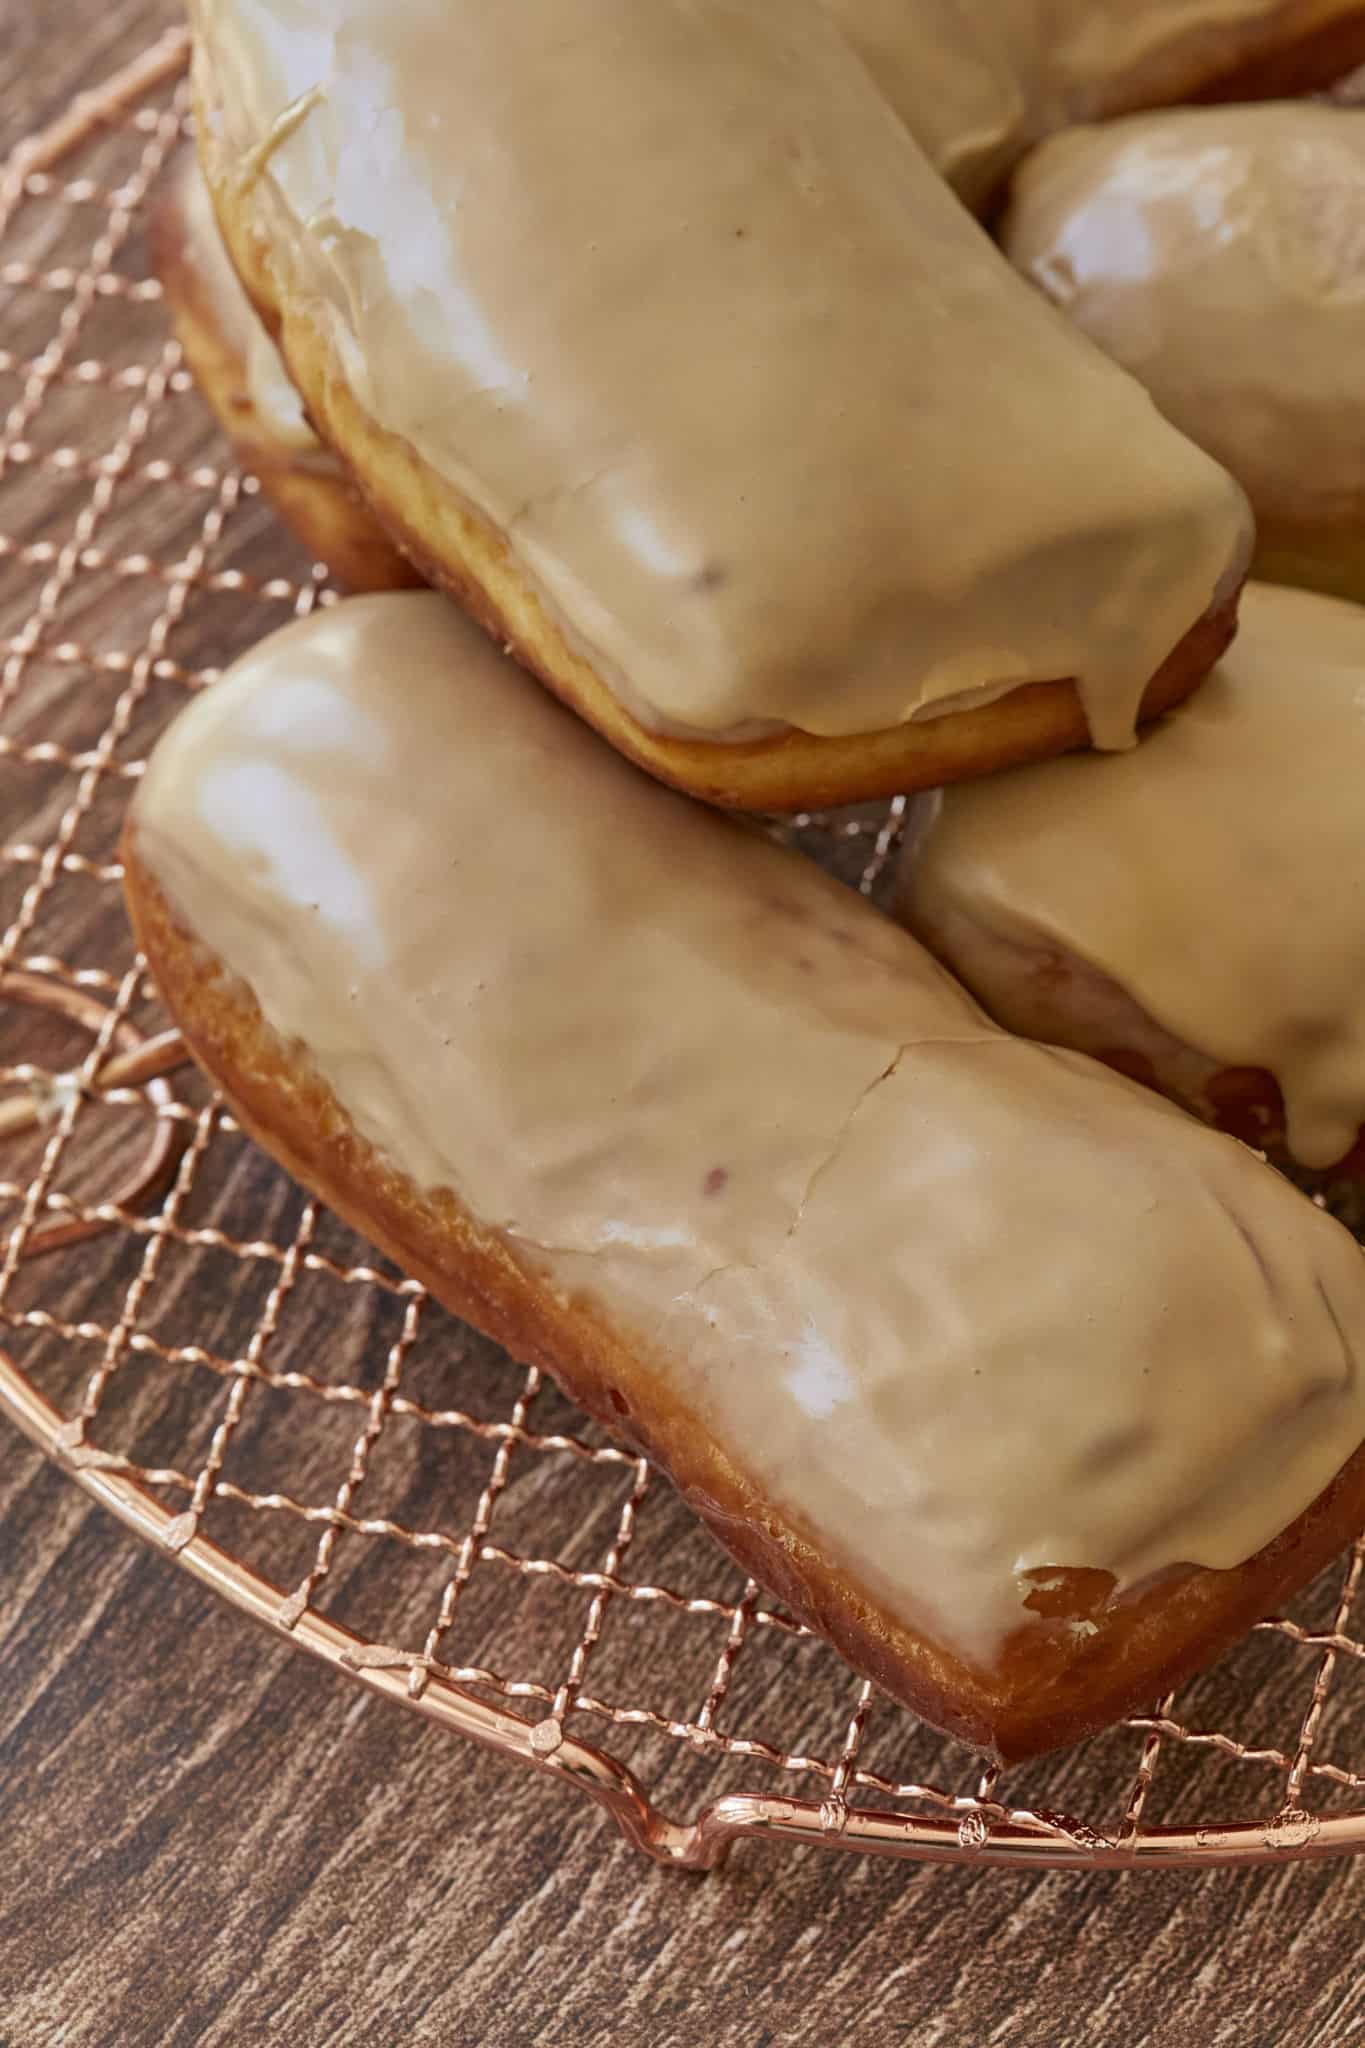 A closeup of the homemade maple bar donuts show the thick maple glaze on top of a chewy donut.